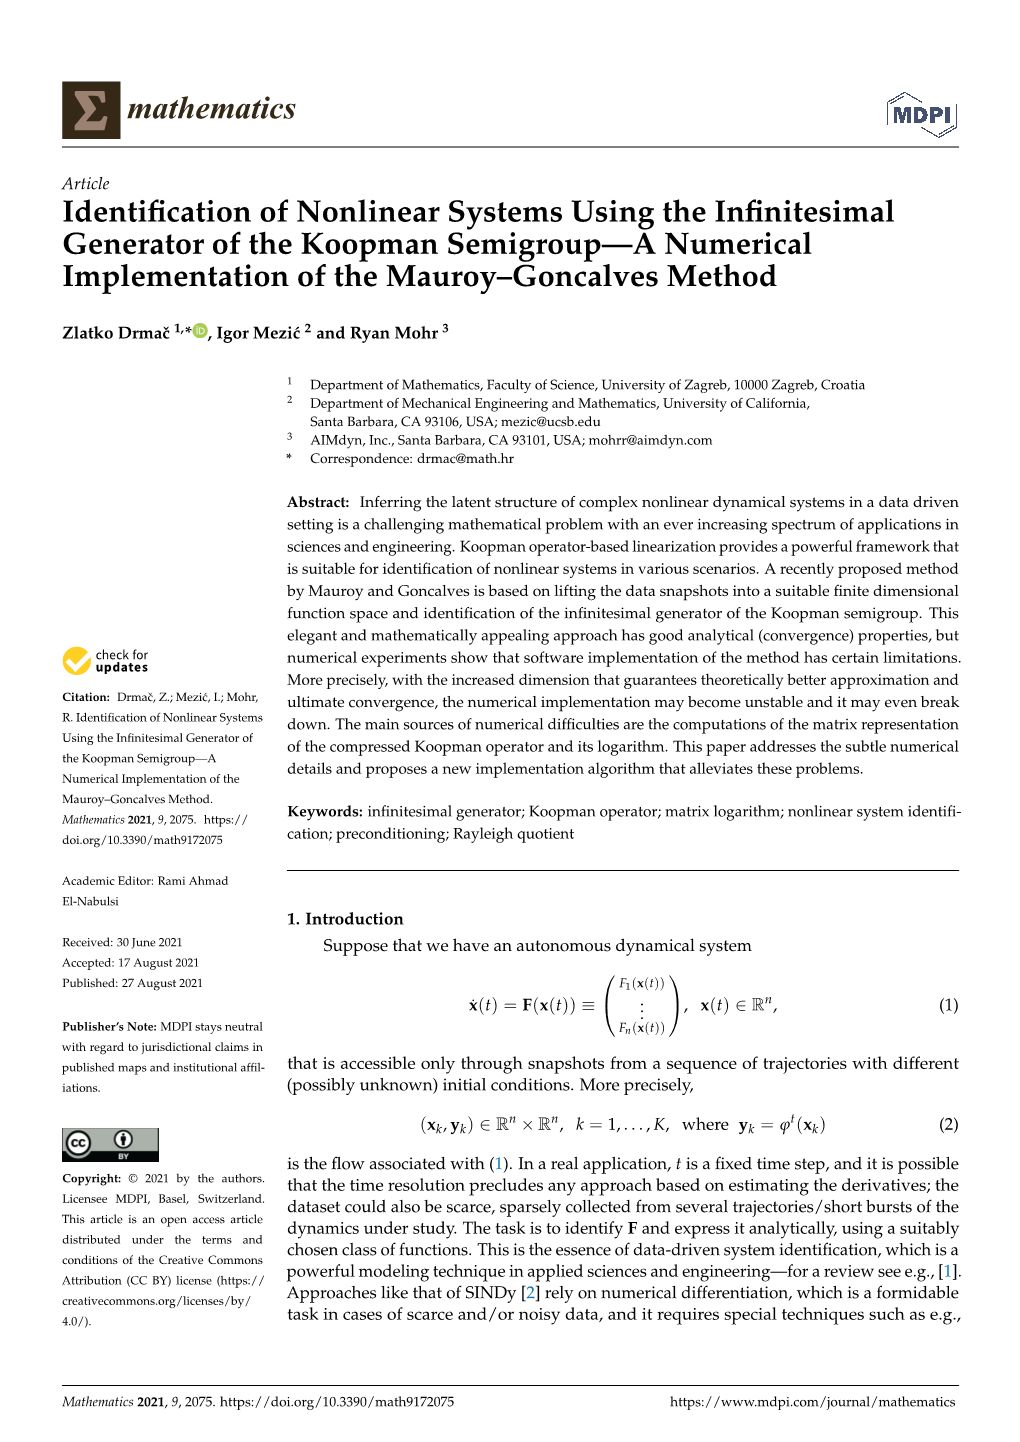 Identification of Nonlinear Systems Using the Infinitesimal Generator of the Koopman Semigroup—A Numerical Implementation of T